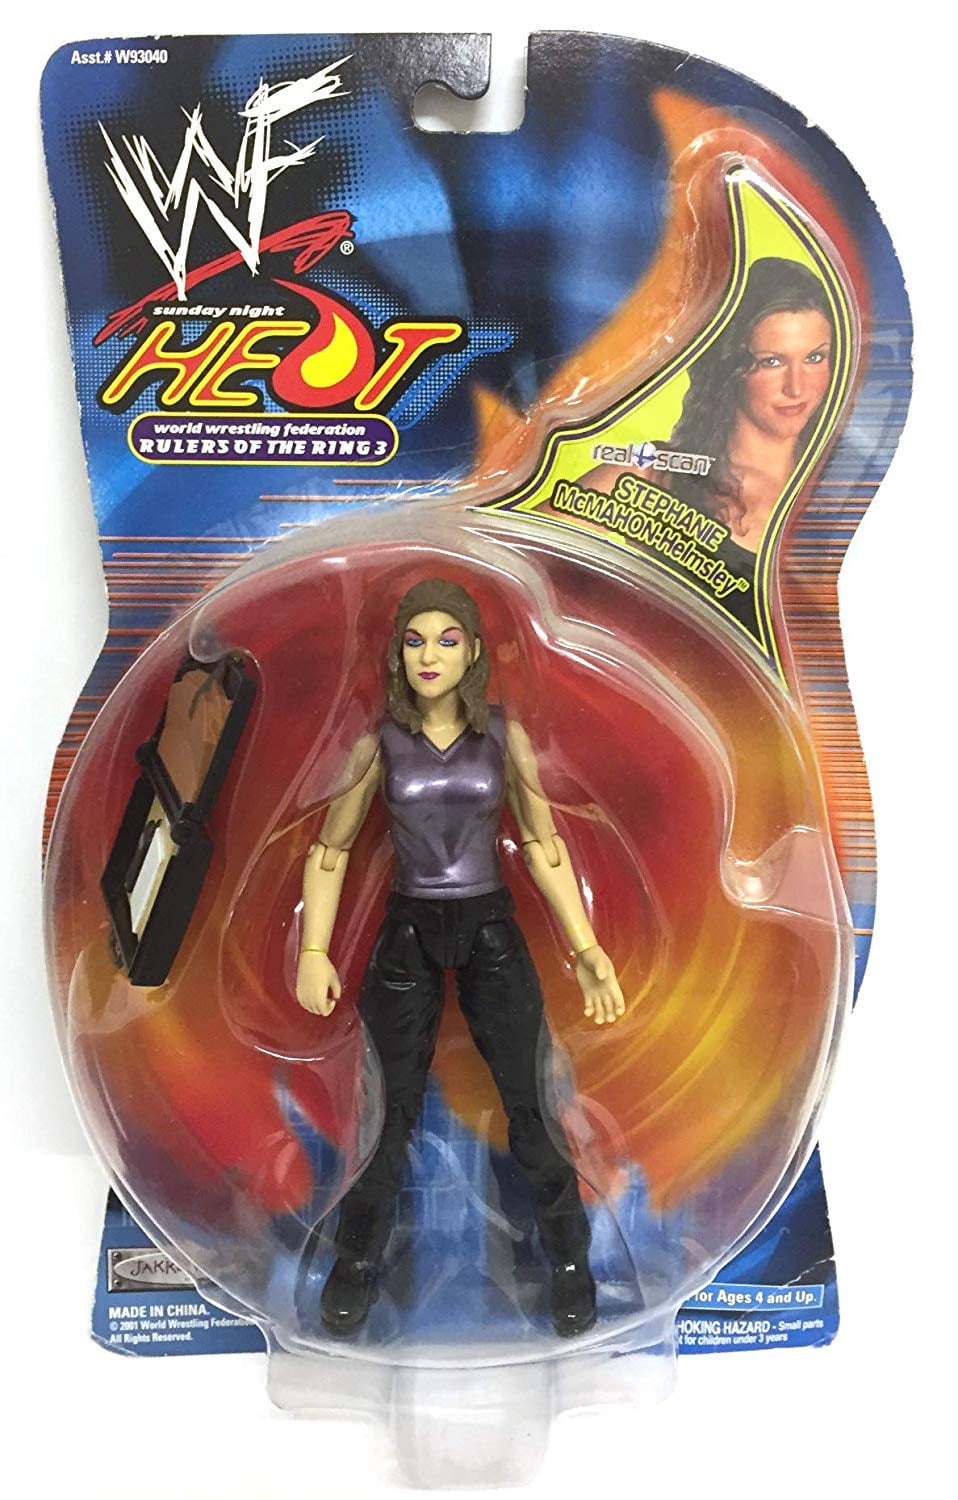 2001 WWF Stephanie McMahon Helmsley Sunday Night Heat Rulers of The Ring 3 for sale online 